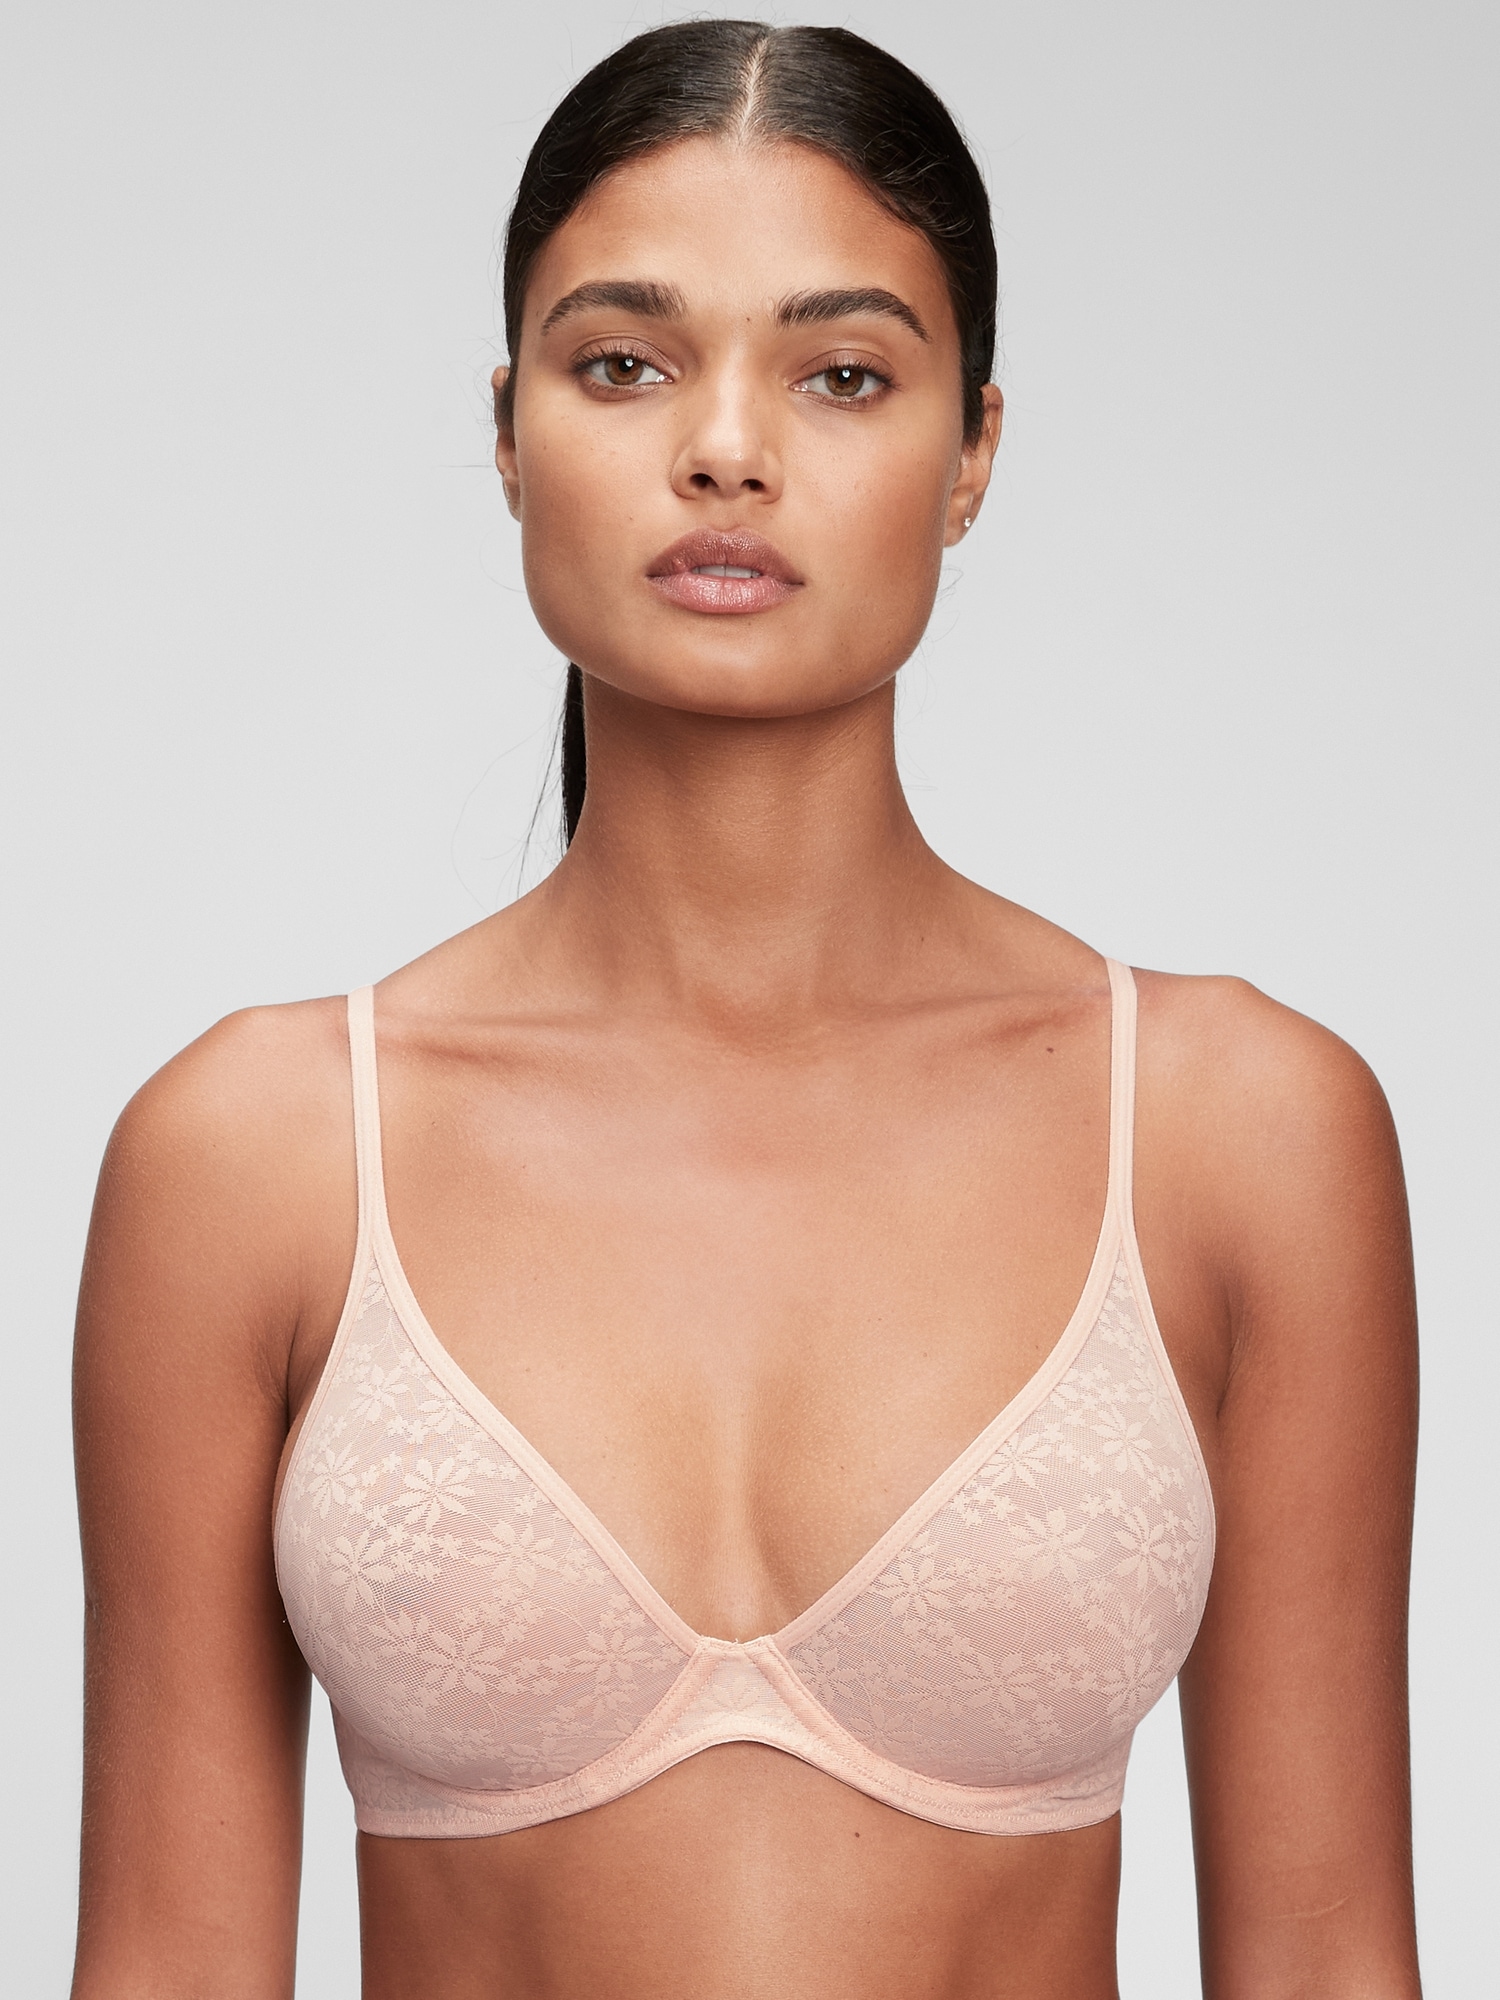 GapBody Favorite Uplift White Bra- Size 36D – The Saved Collection